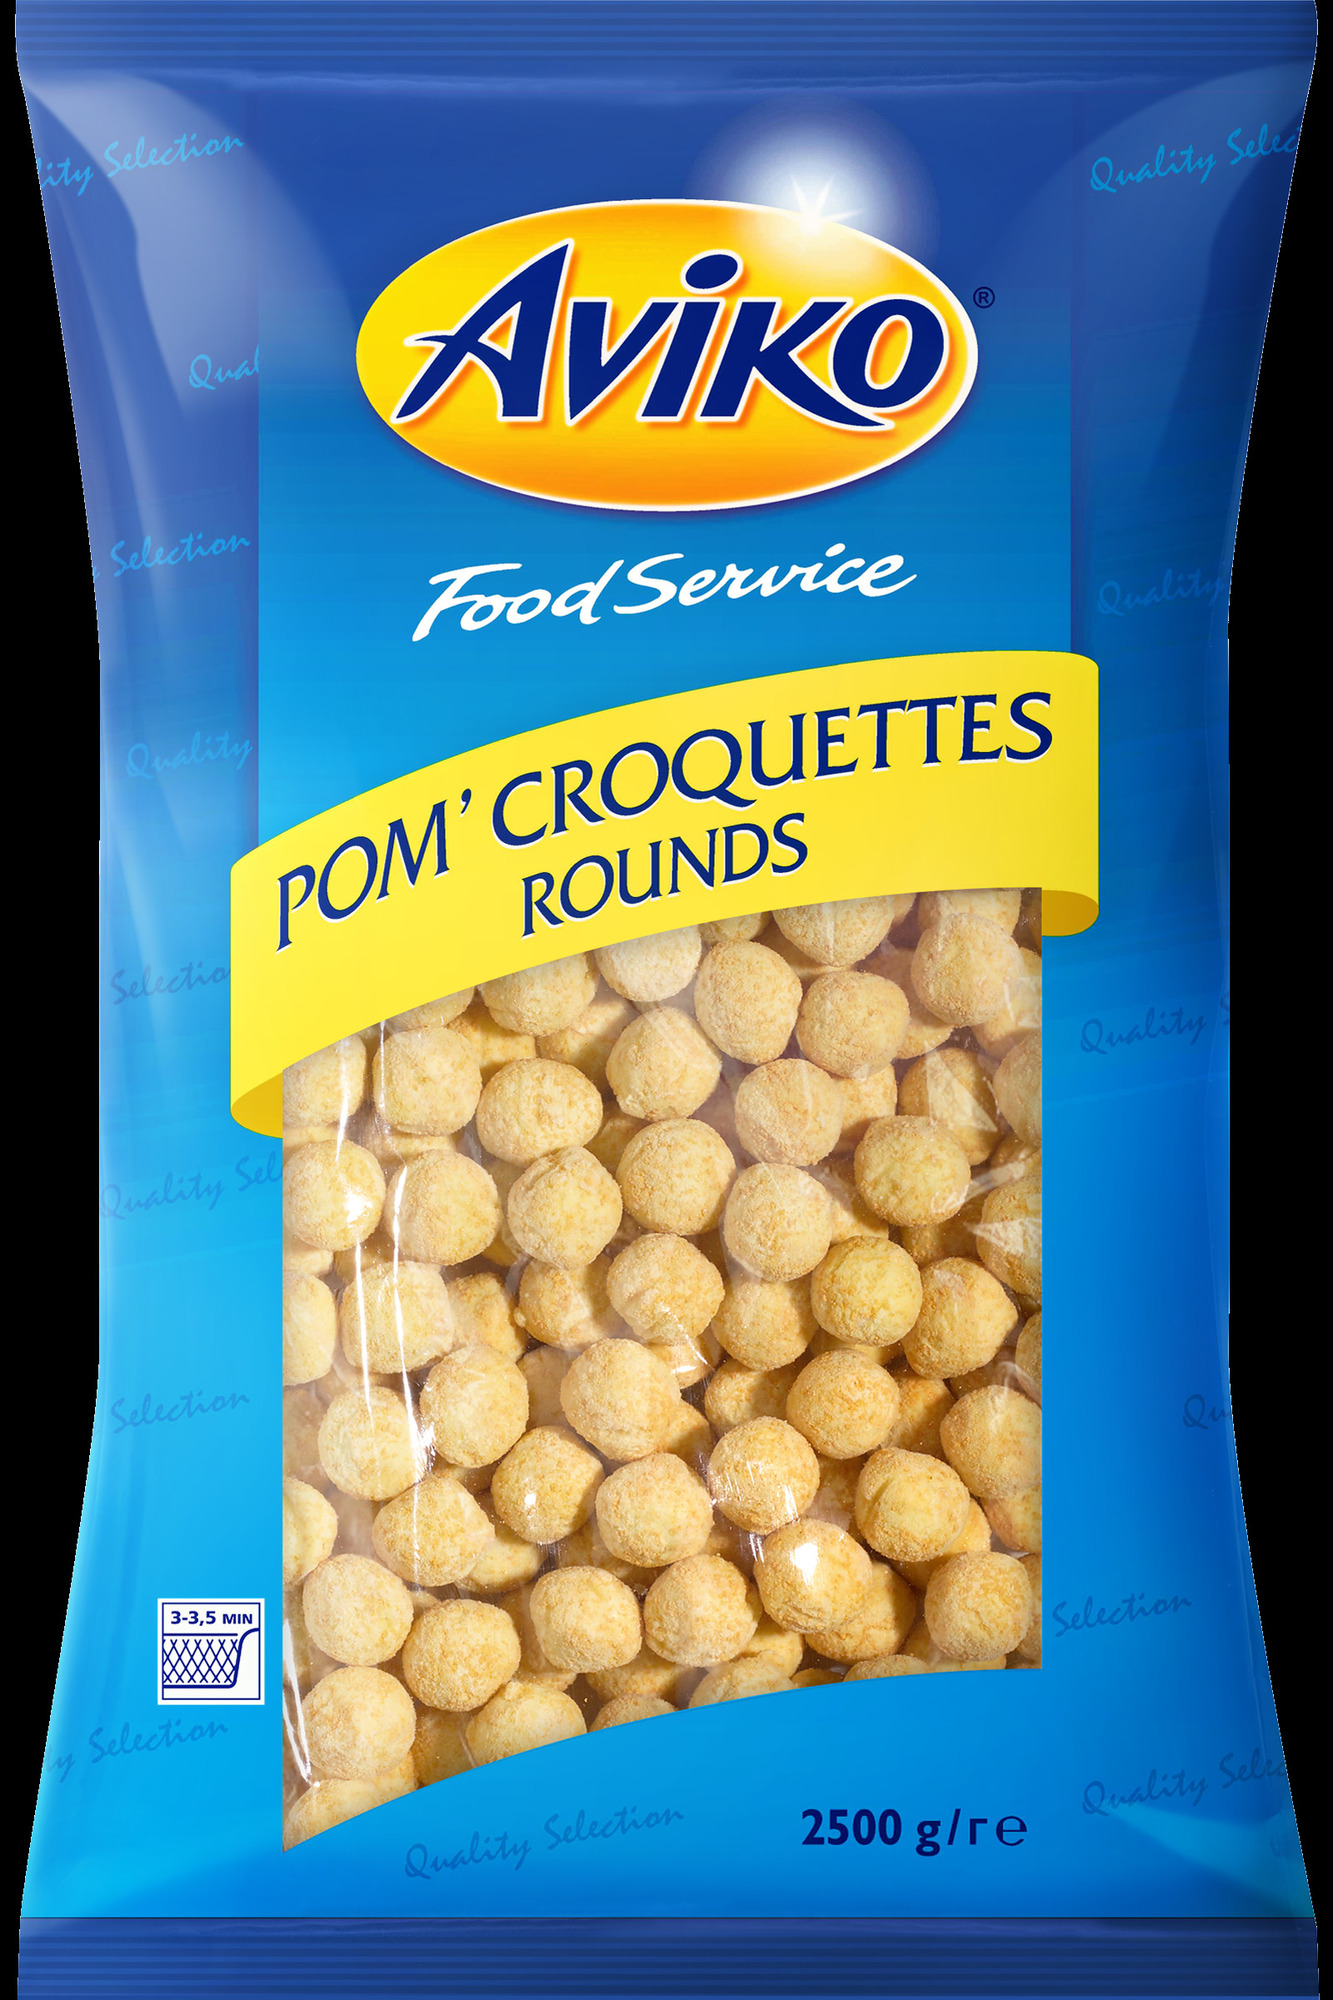 Pom`Croquettes rounds 2500g